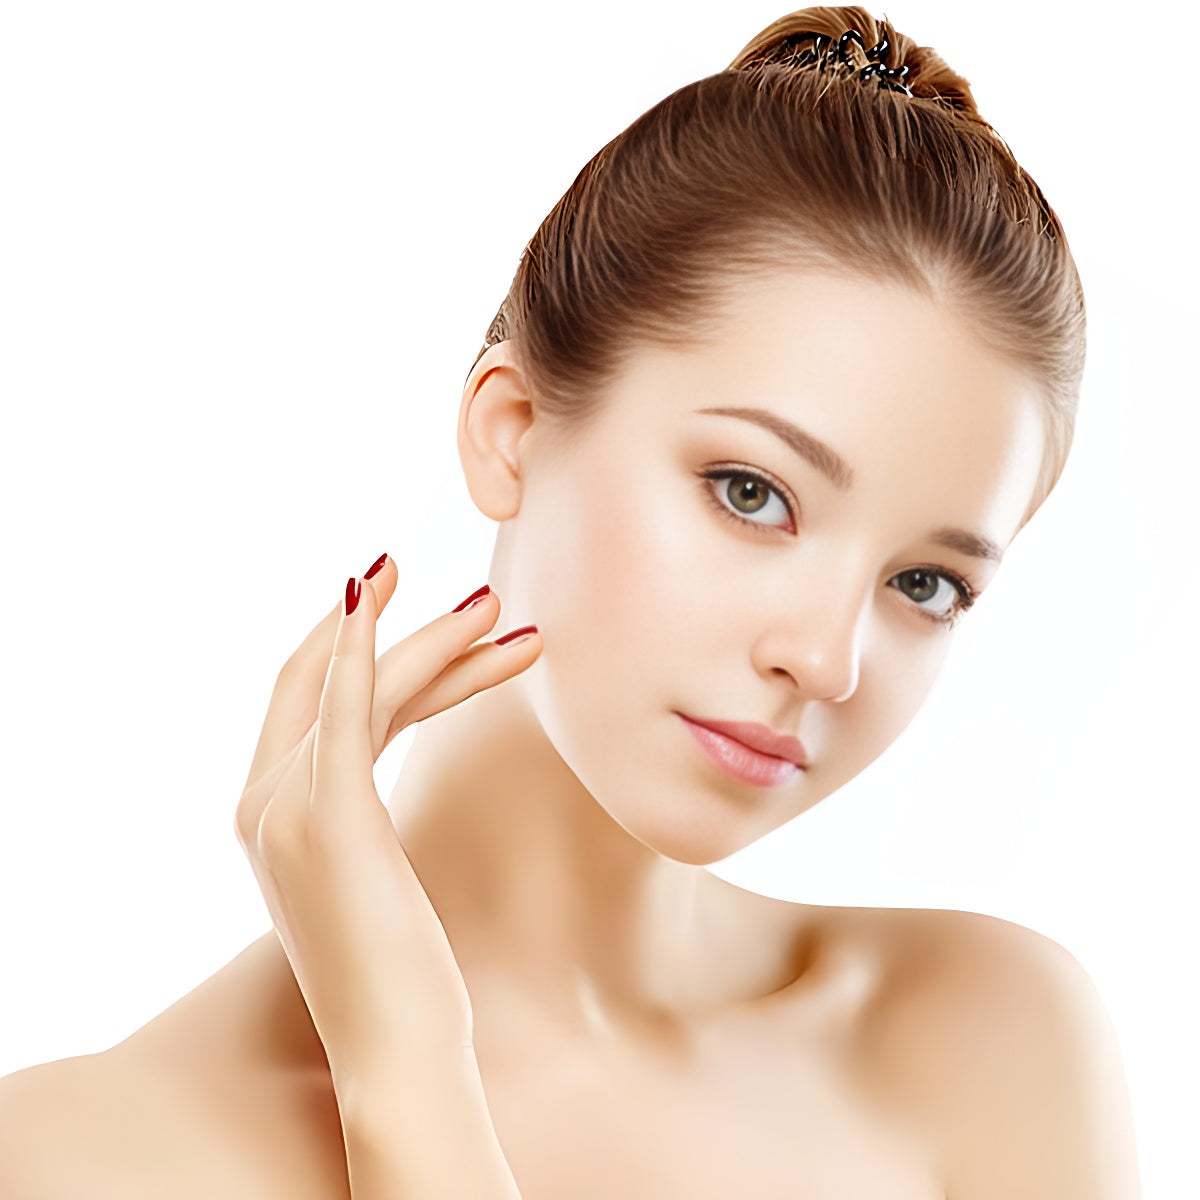 Skin care - For Natural herbal care and How you care for your skin can greatly affect your appearance.